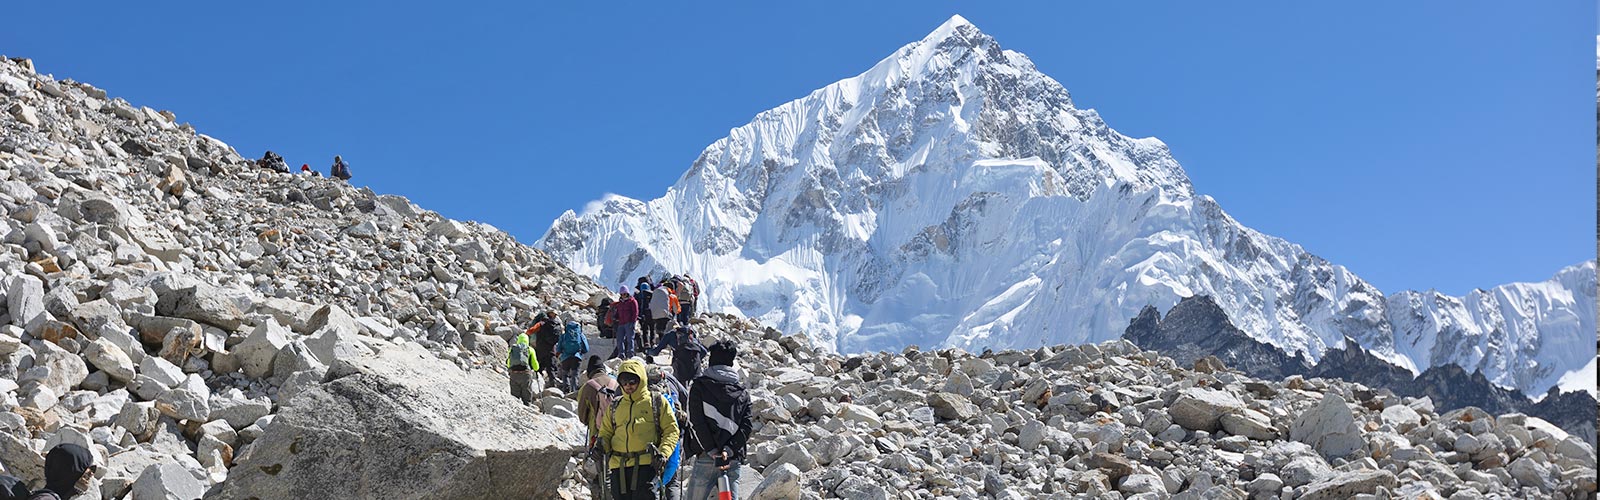 Complete Guide to Solo Trek to Everest Base Camp in Nepal